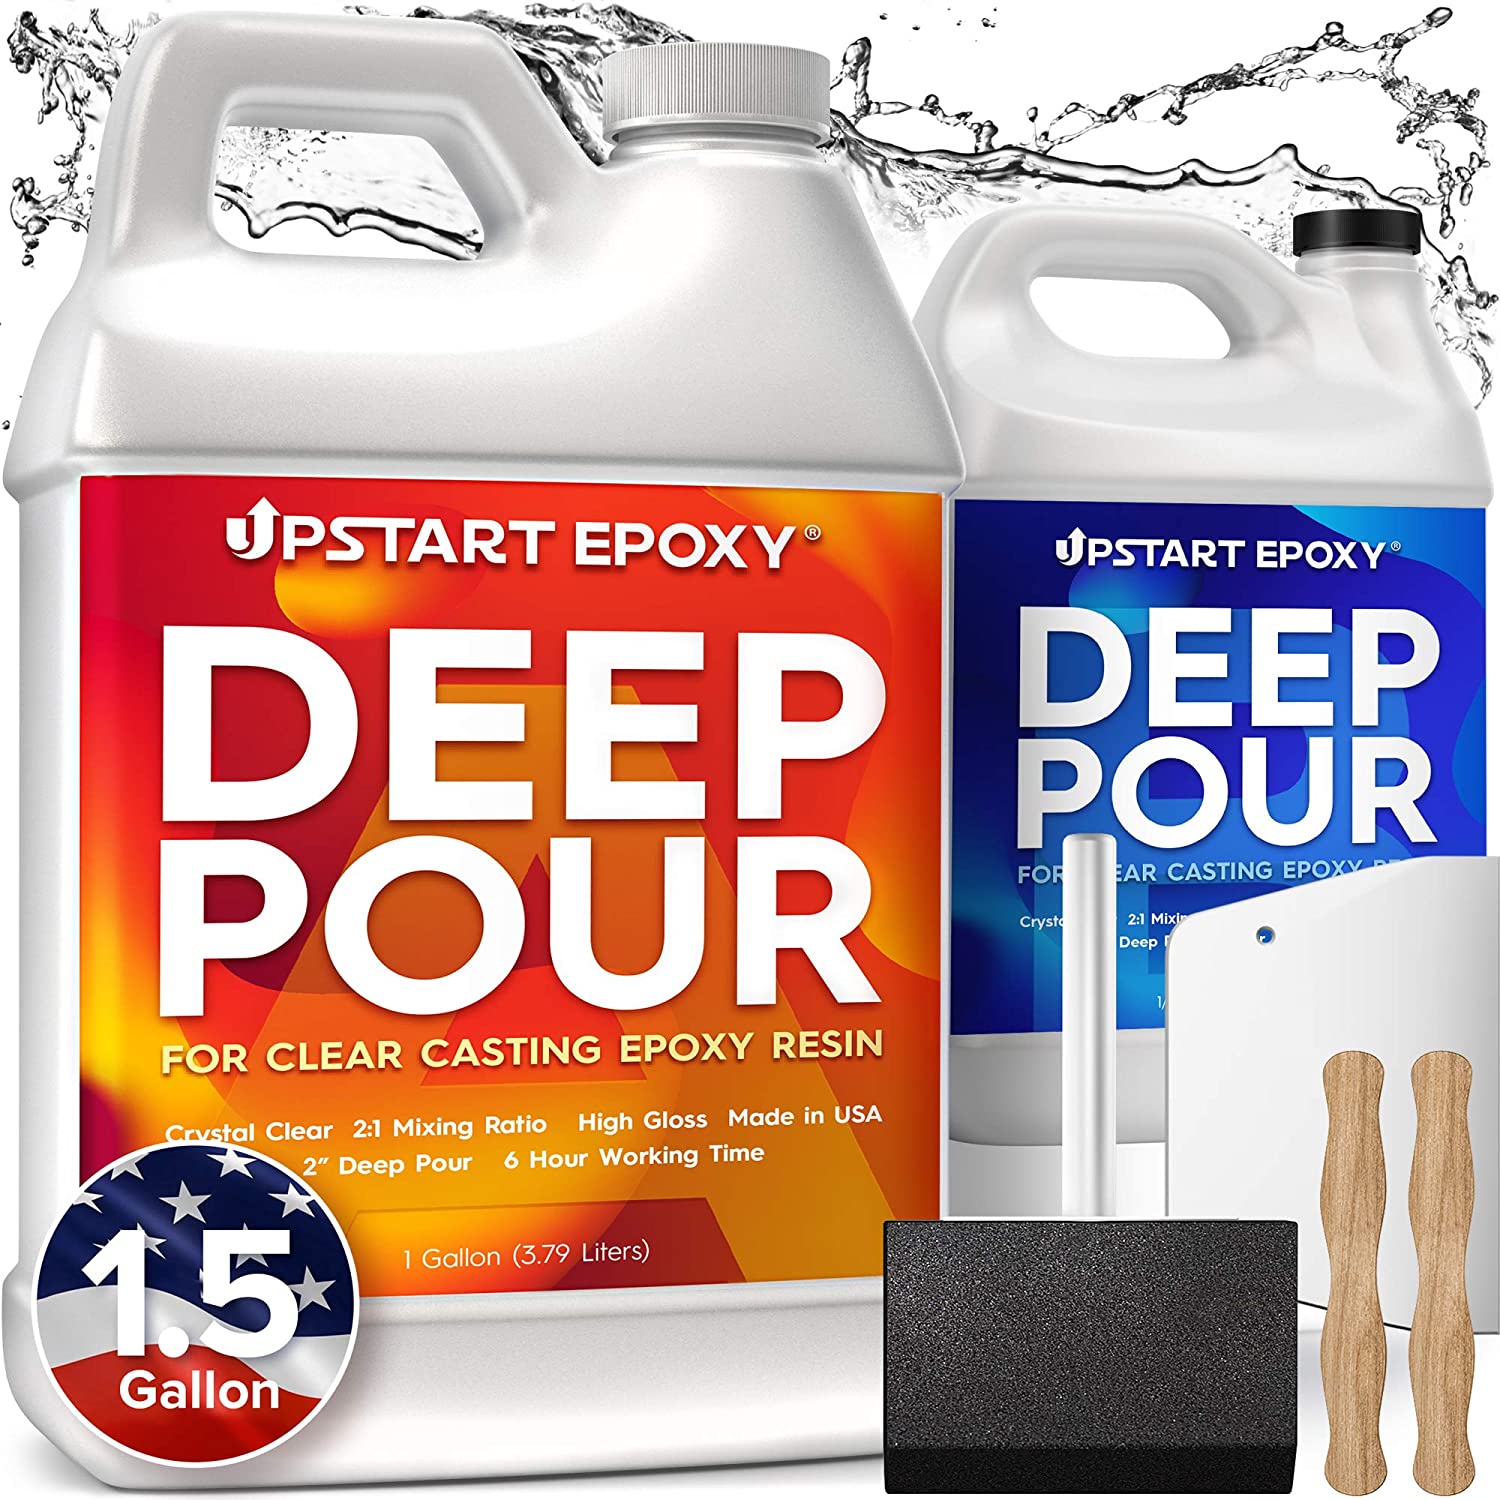 The Epoxy Resin Store Clear Epoxy Resin Kit, Easy Mixing, 2 Part, High  Gloss Finish, Tabletops, Counter Tops, Art, Crafts 1 Gallon Kit 